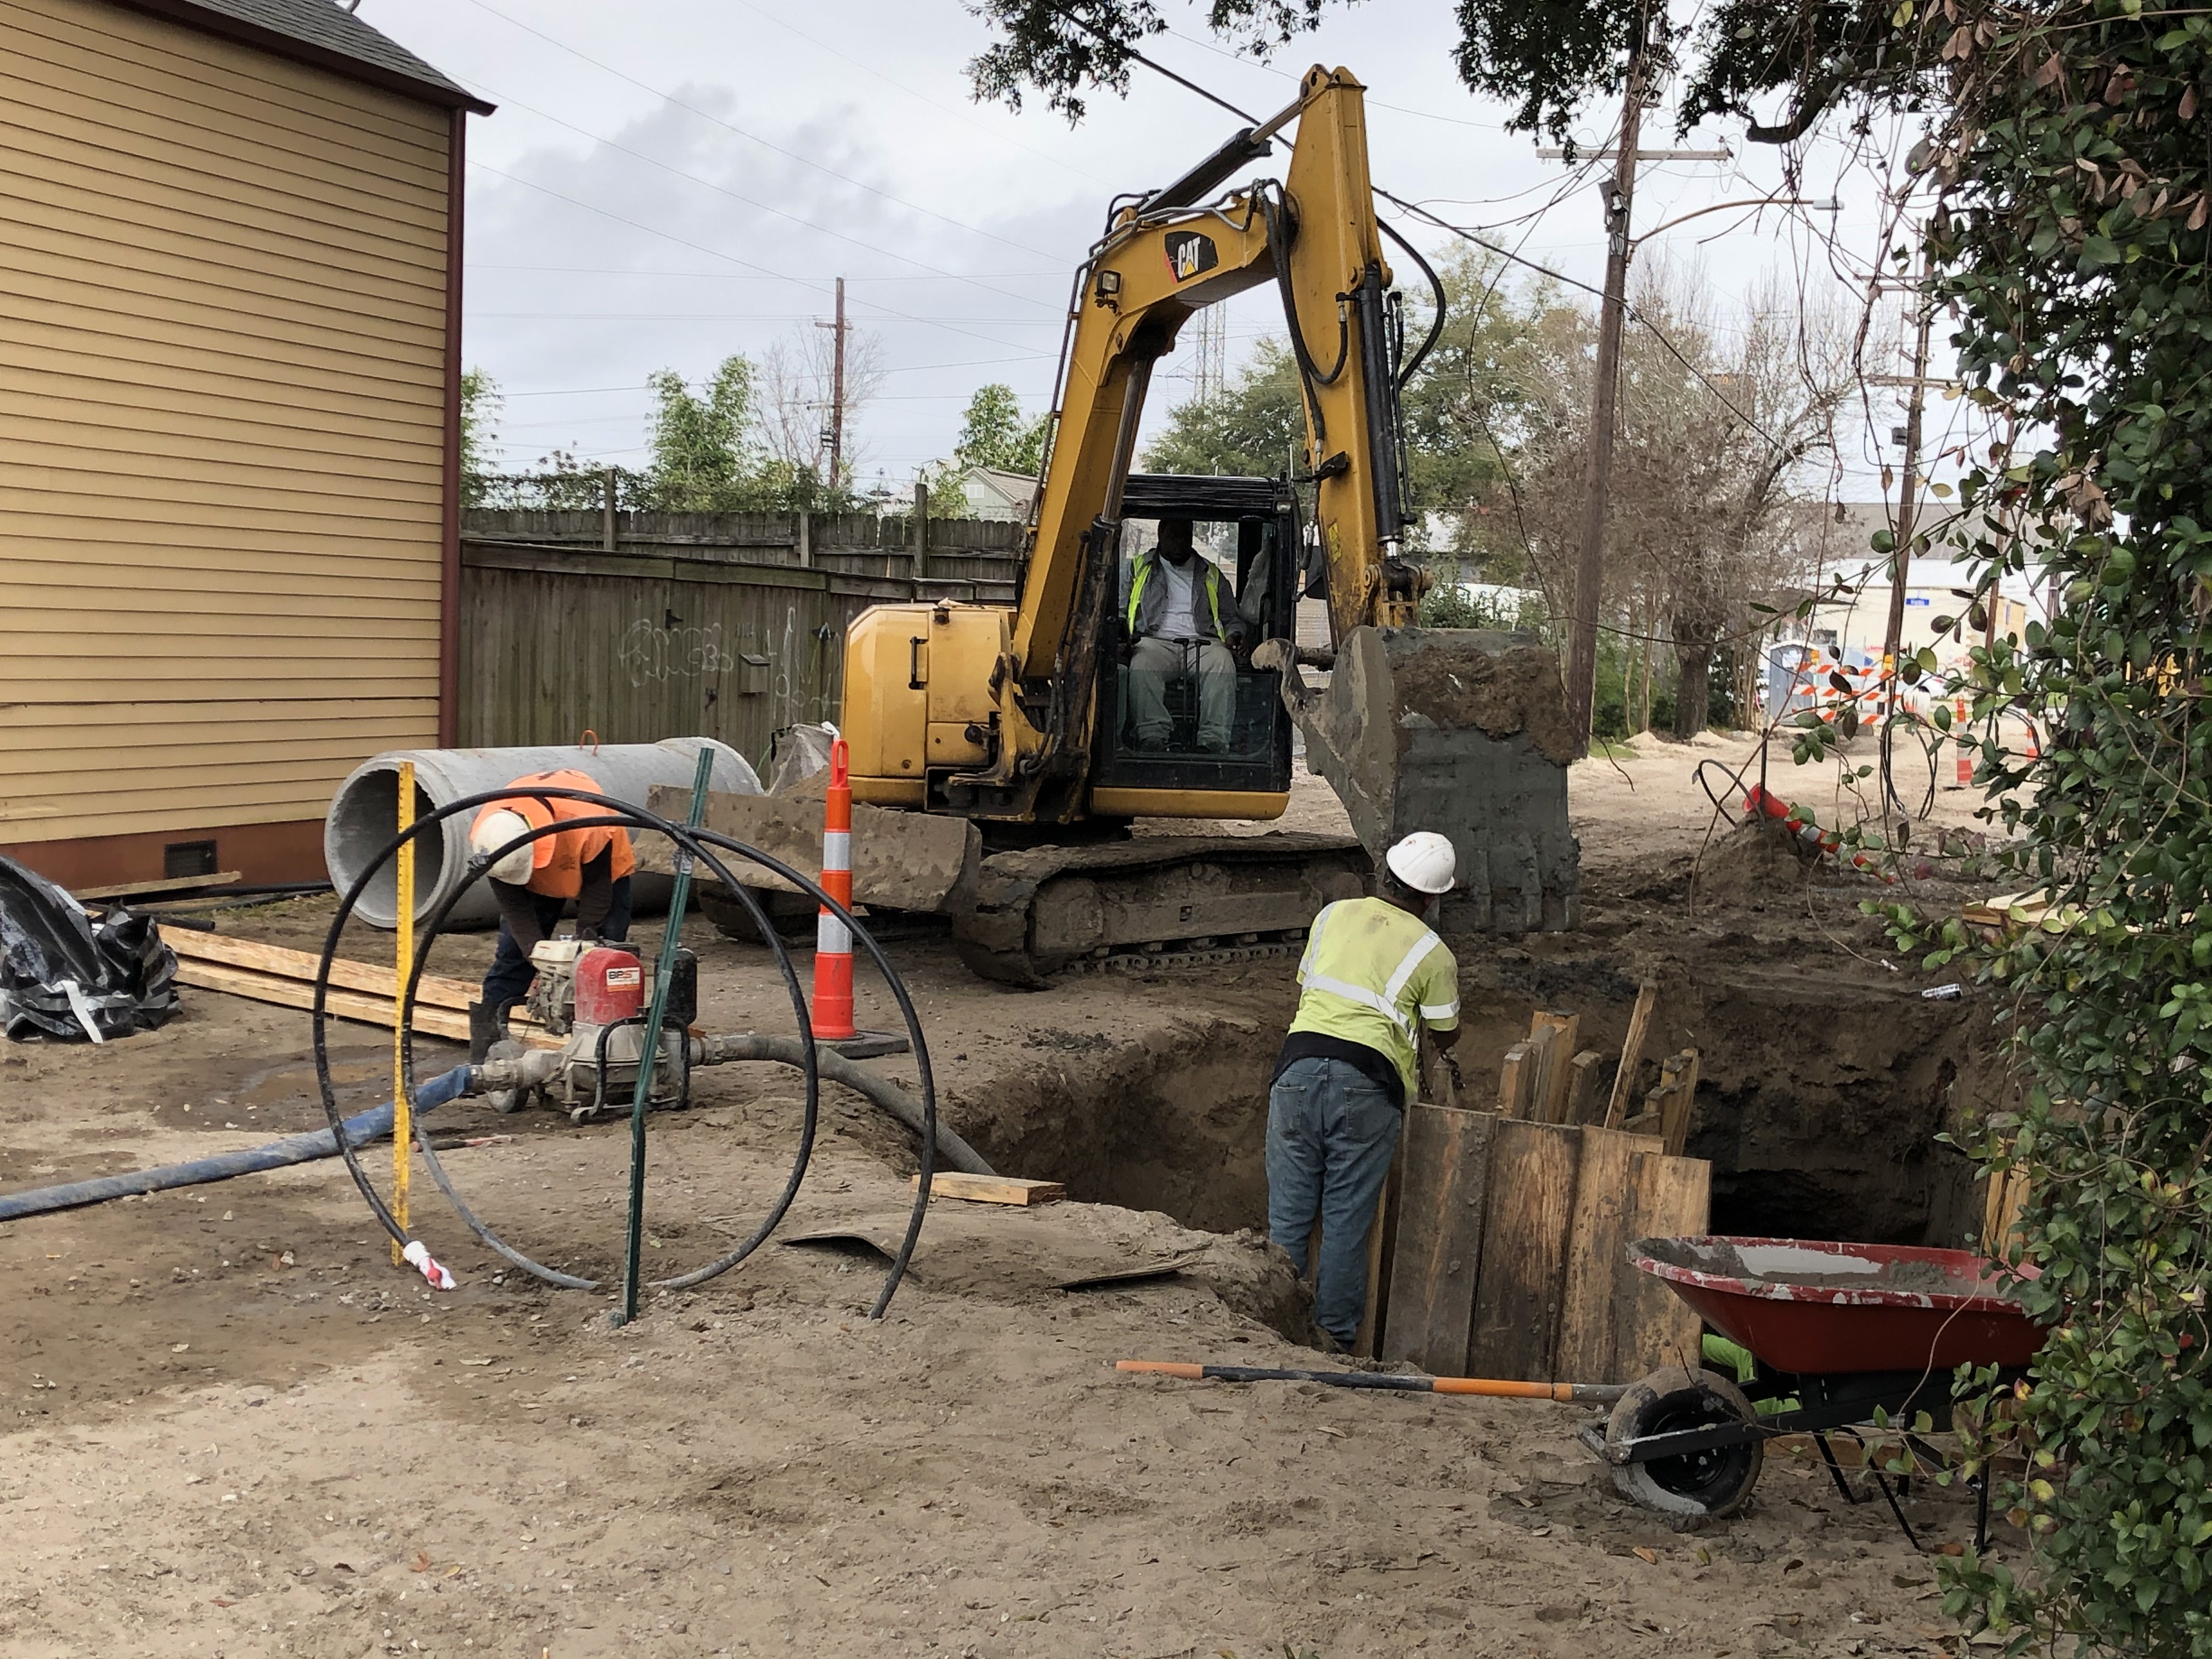 CREWS CONTINUE INSTALLING NEW DRAINAGE ELEMENTS IN UPPER NINTH WARD